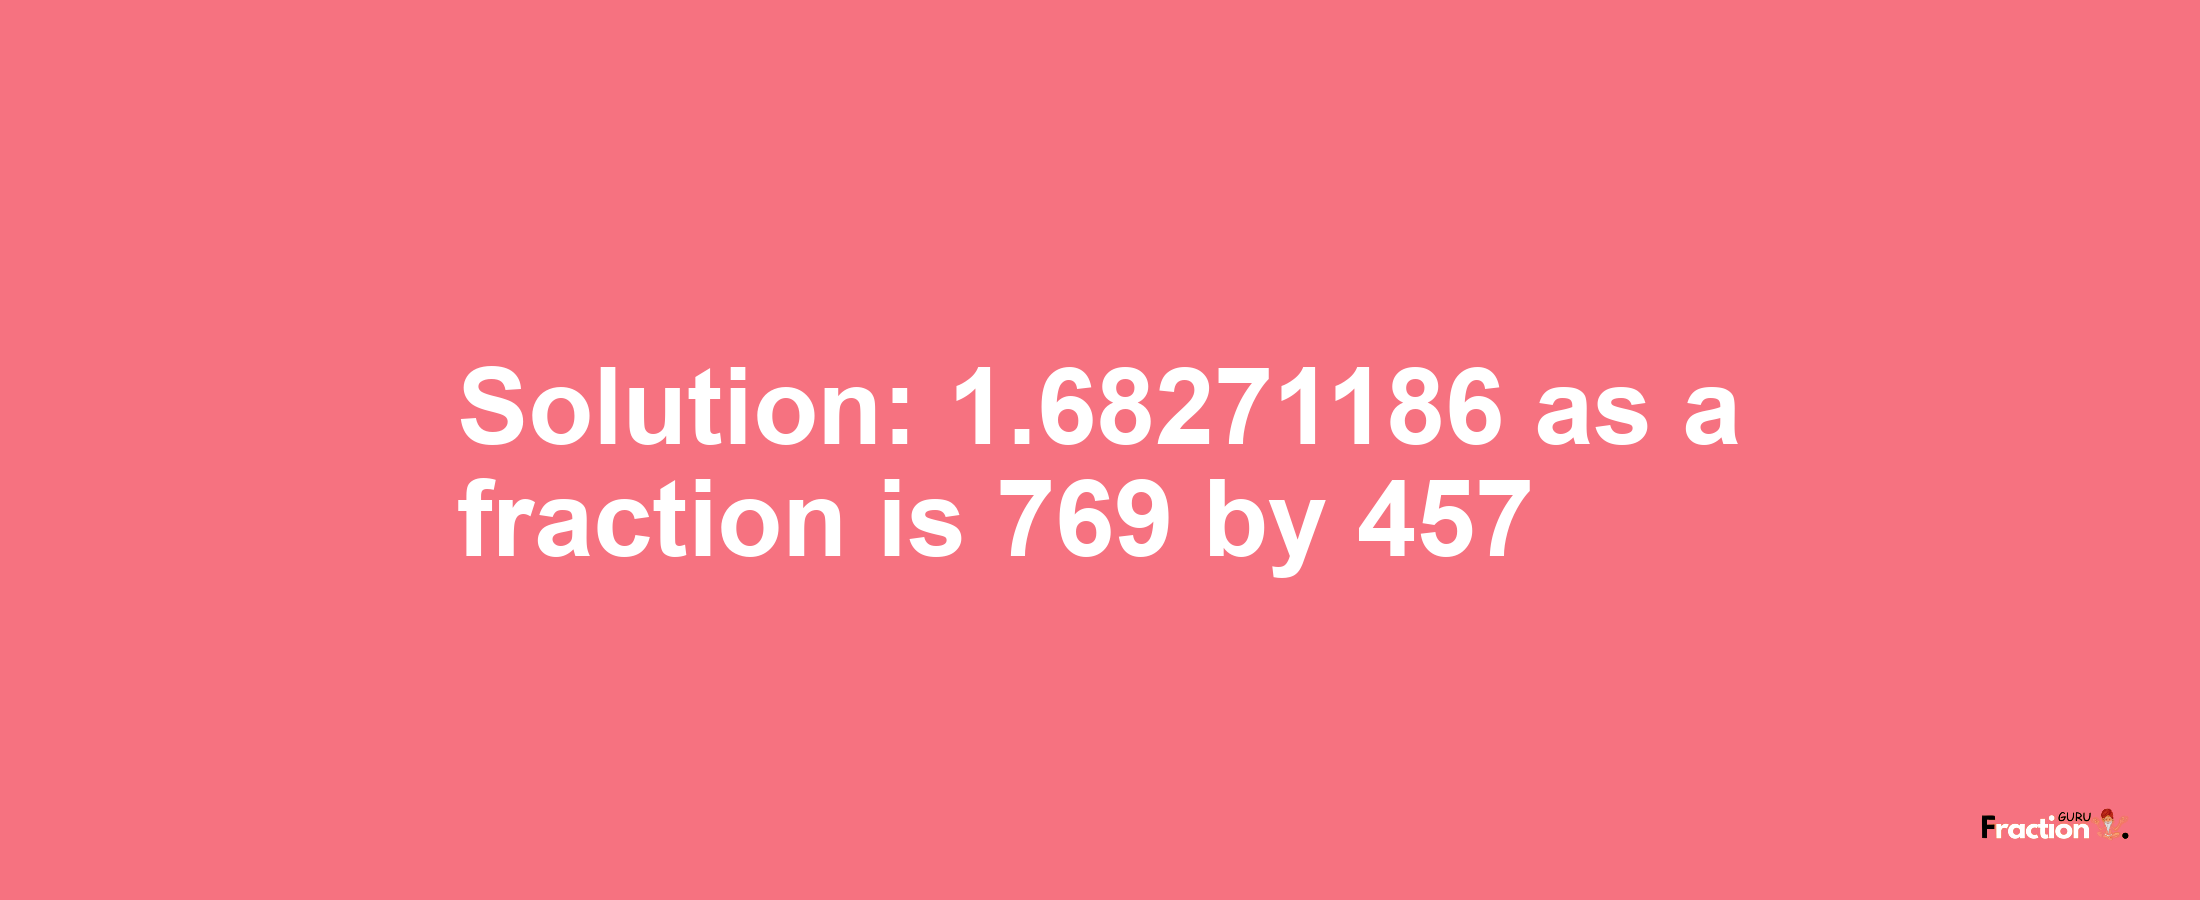 Solution:1.68271186 as a fraction is 769/457